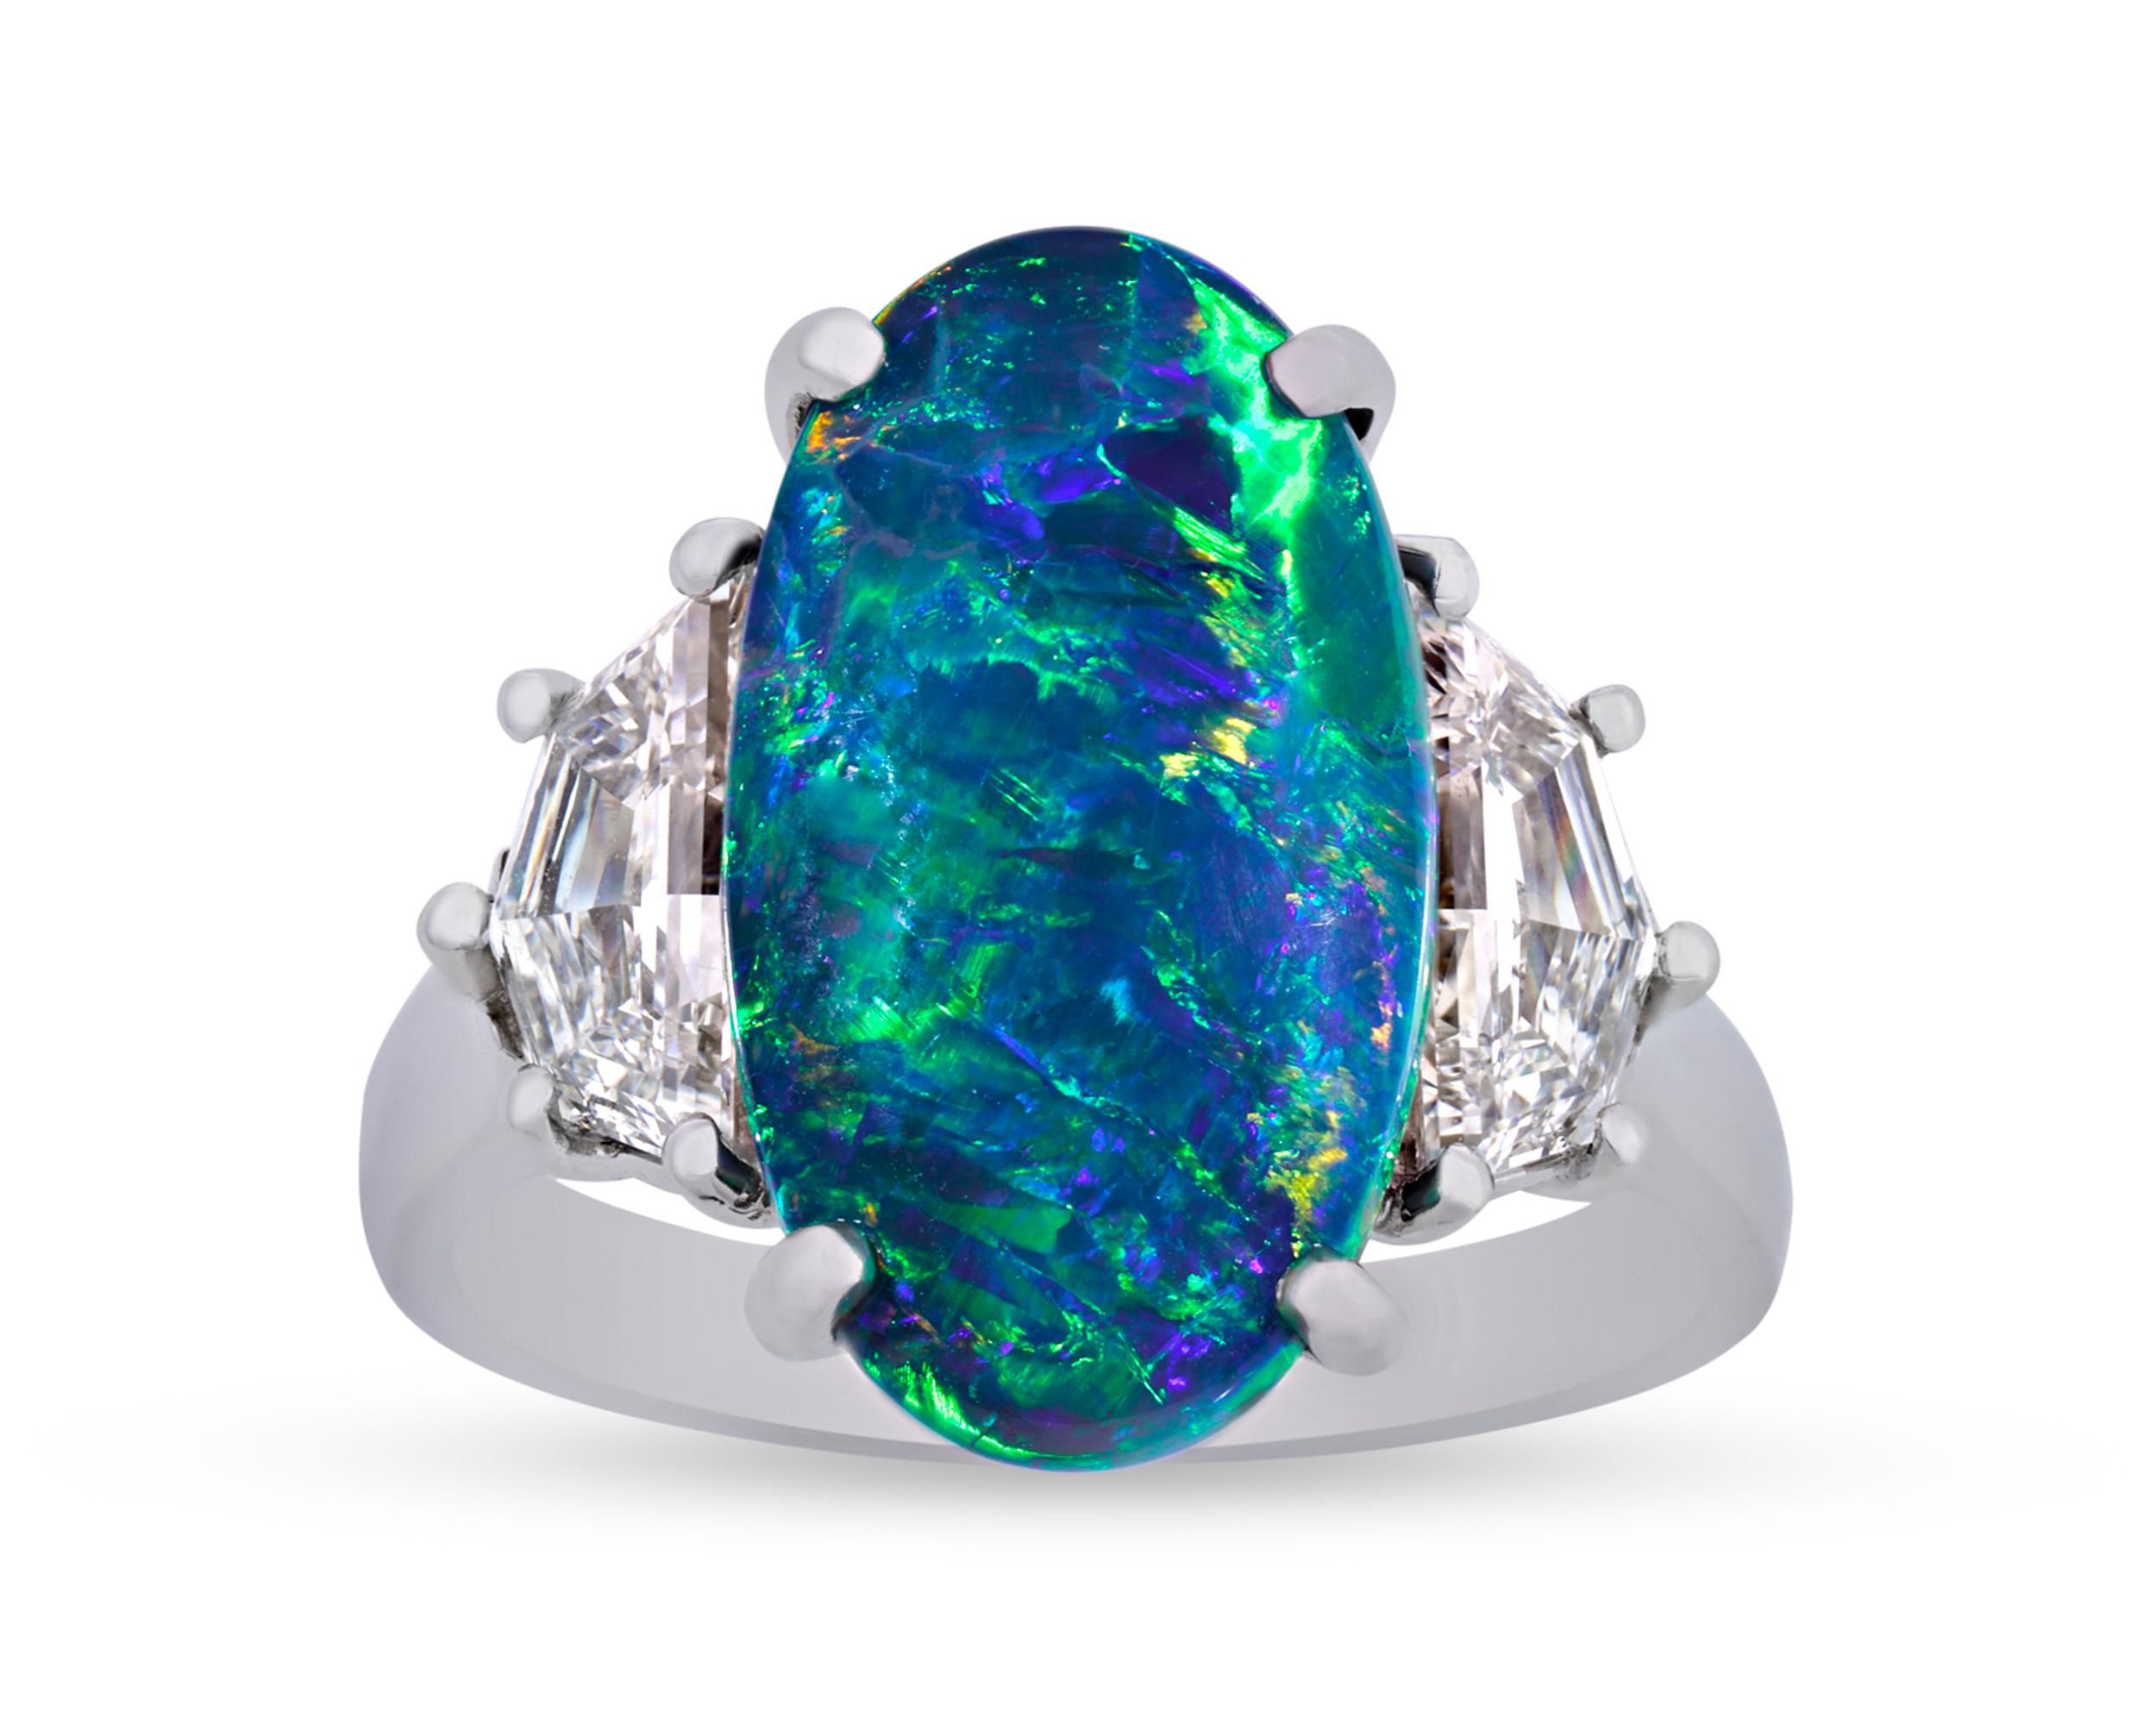 This stunning ring by legendary American jeweler Oscar Heyman features an impressive 4.87-carat oval black opal. Black opals are highly sought after because of their vibrant hues and interplay of colors. With its deep blues and greens, this opal